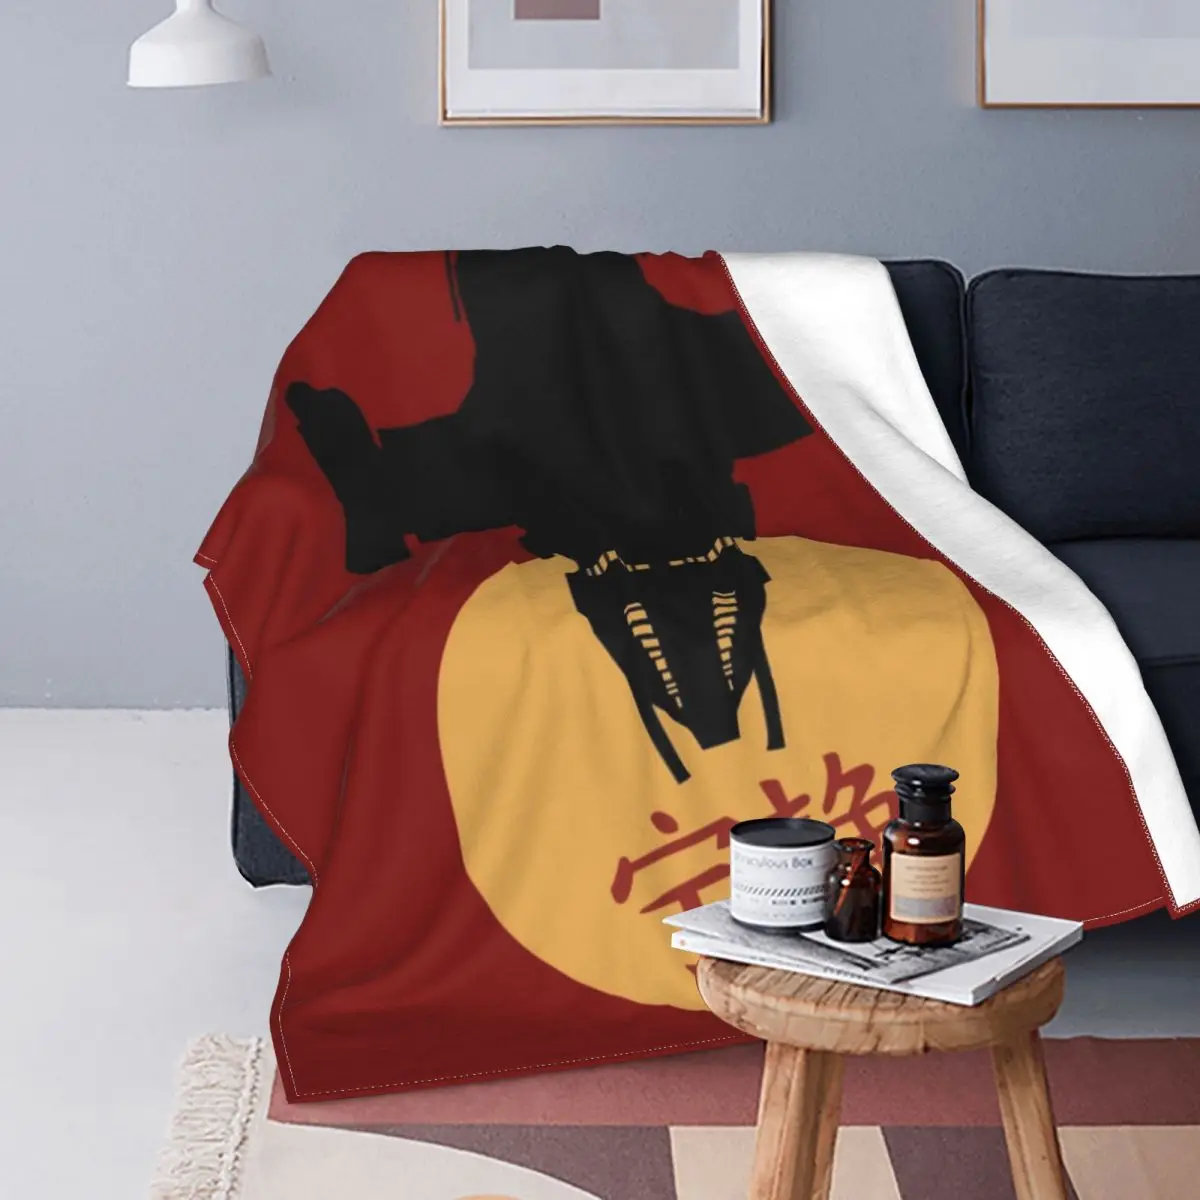 

Firefly - Serenity Silhouette - Joss Whedon Blankets Flannel Super Soft Throw Blanket Sofa Throw Blanket For Couch Travel Throws